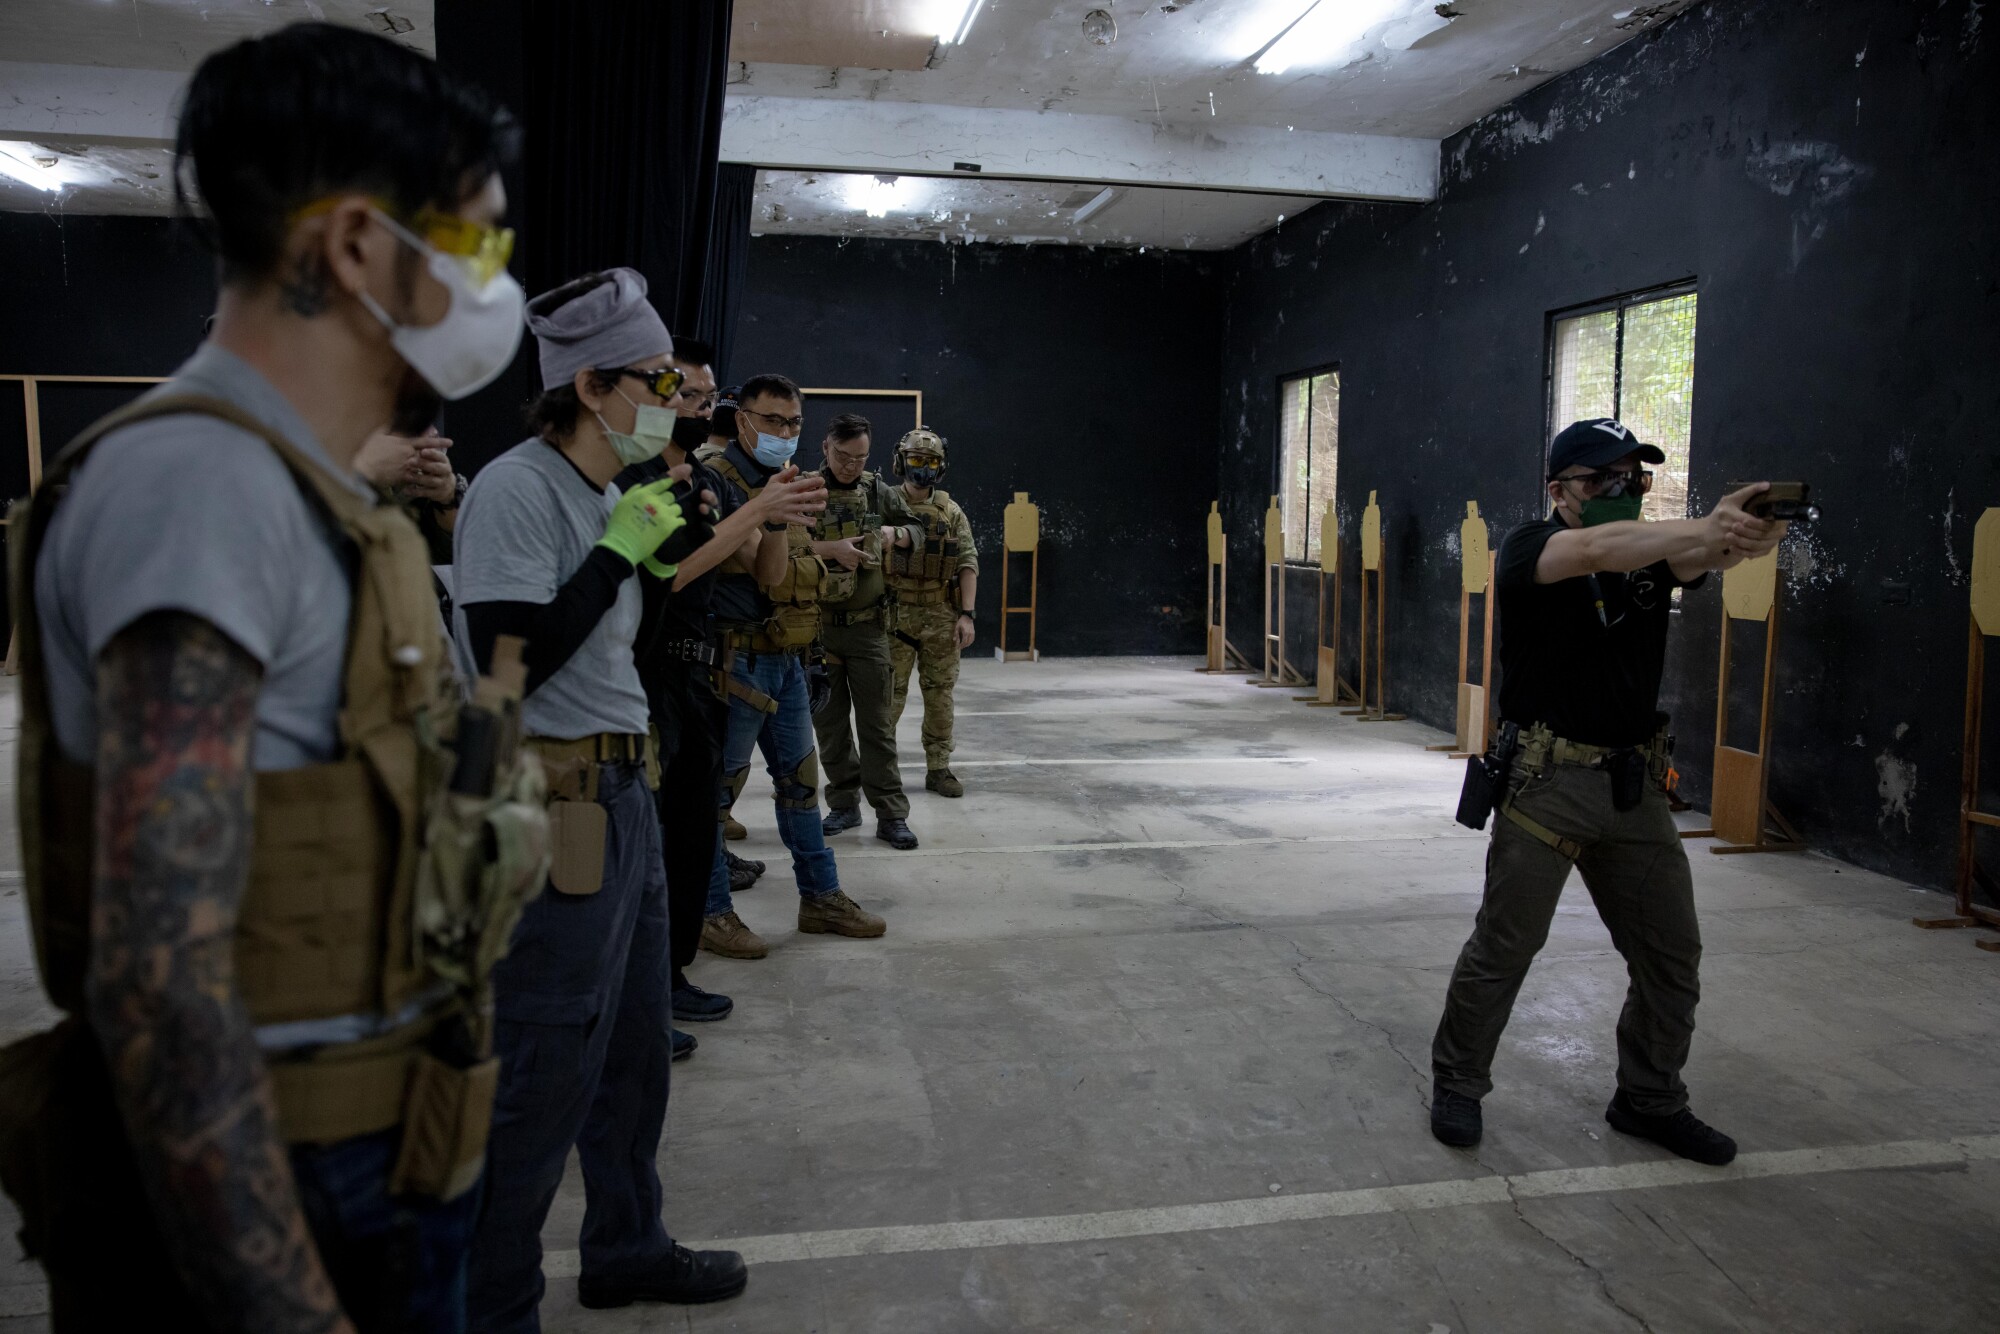 A row of people watch a man shoots a weapon.